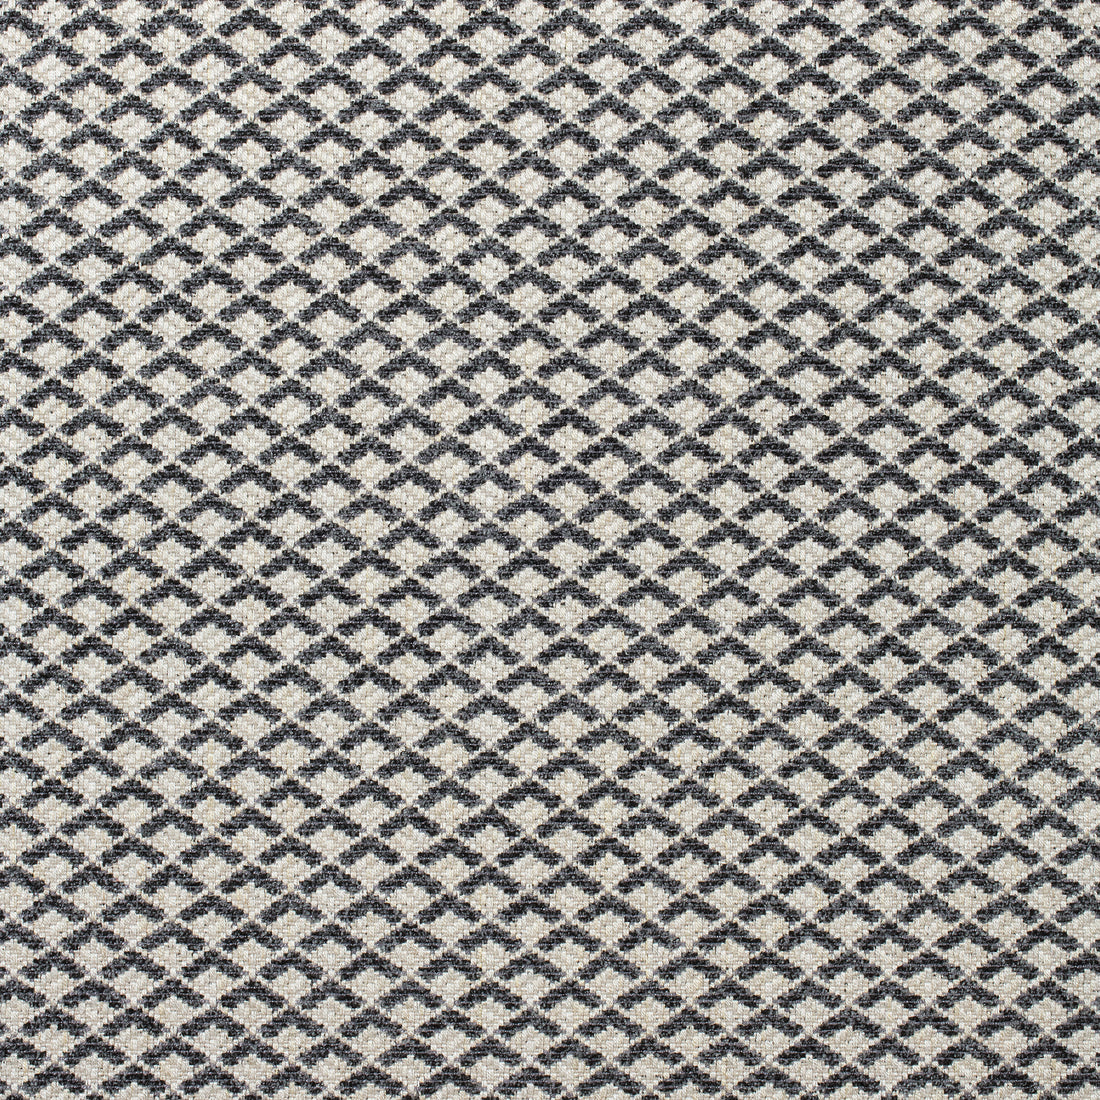 Scala fabric in charcoal color - pattern number W80729 - by Thibaut in the Woven Resource 11: Rialto collection